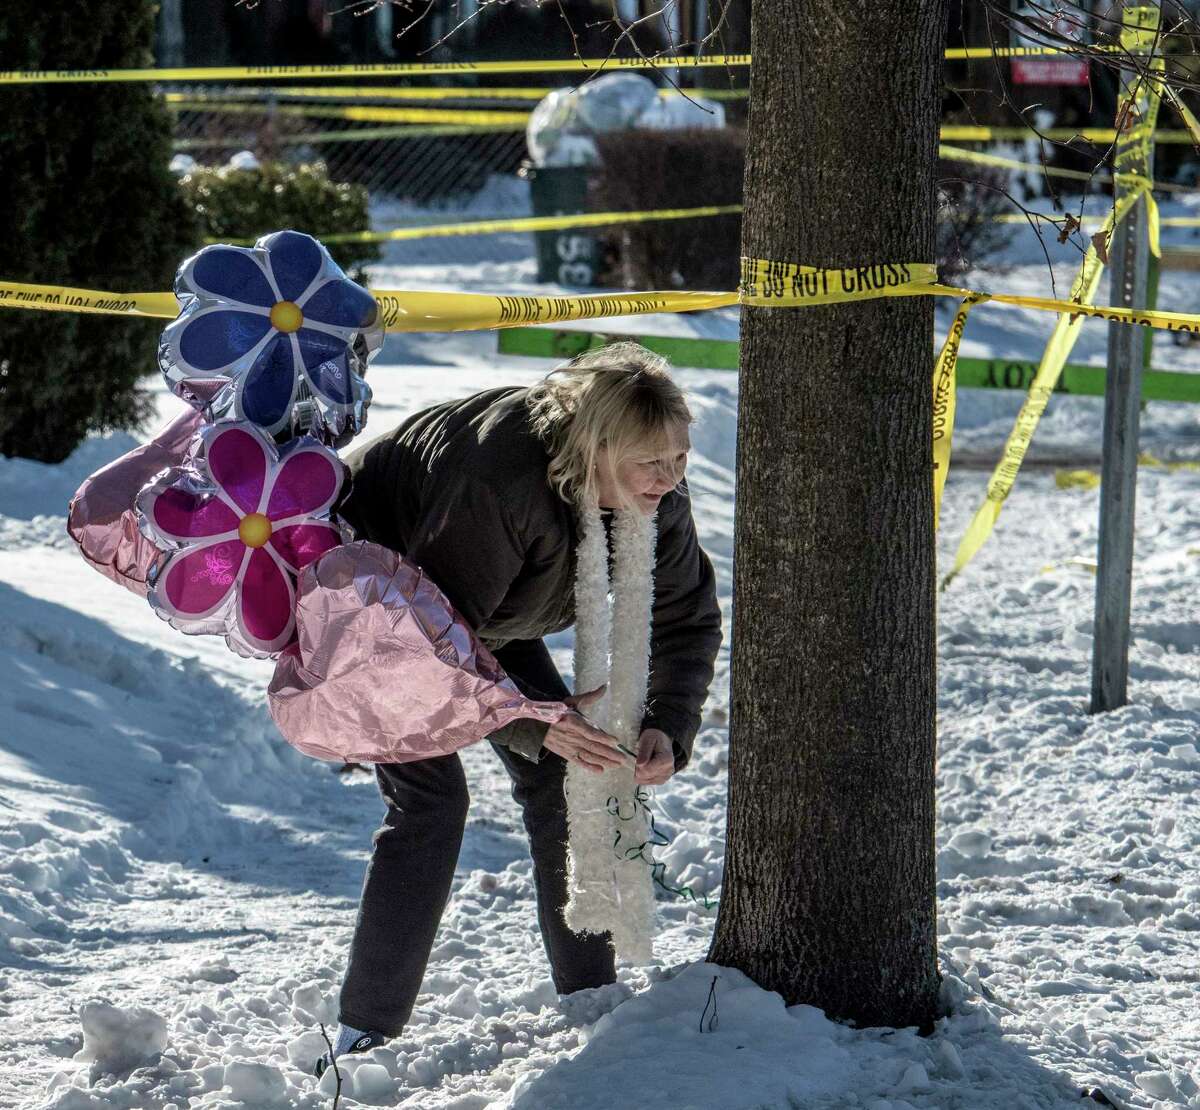 A woman, who asked not to be identified, brings a bouquet of balloons to start a makeshift memorial near the home at 158 Second Ave. on Thursday, Dec 28, 2017, the scene of a quadruple murder earlier in the week in Troy, N.Y. (Skip Dickstein/ Times Union)